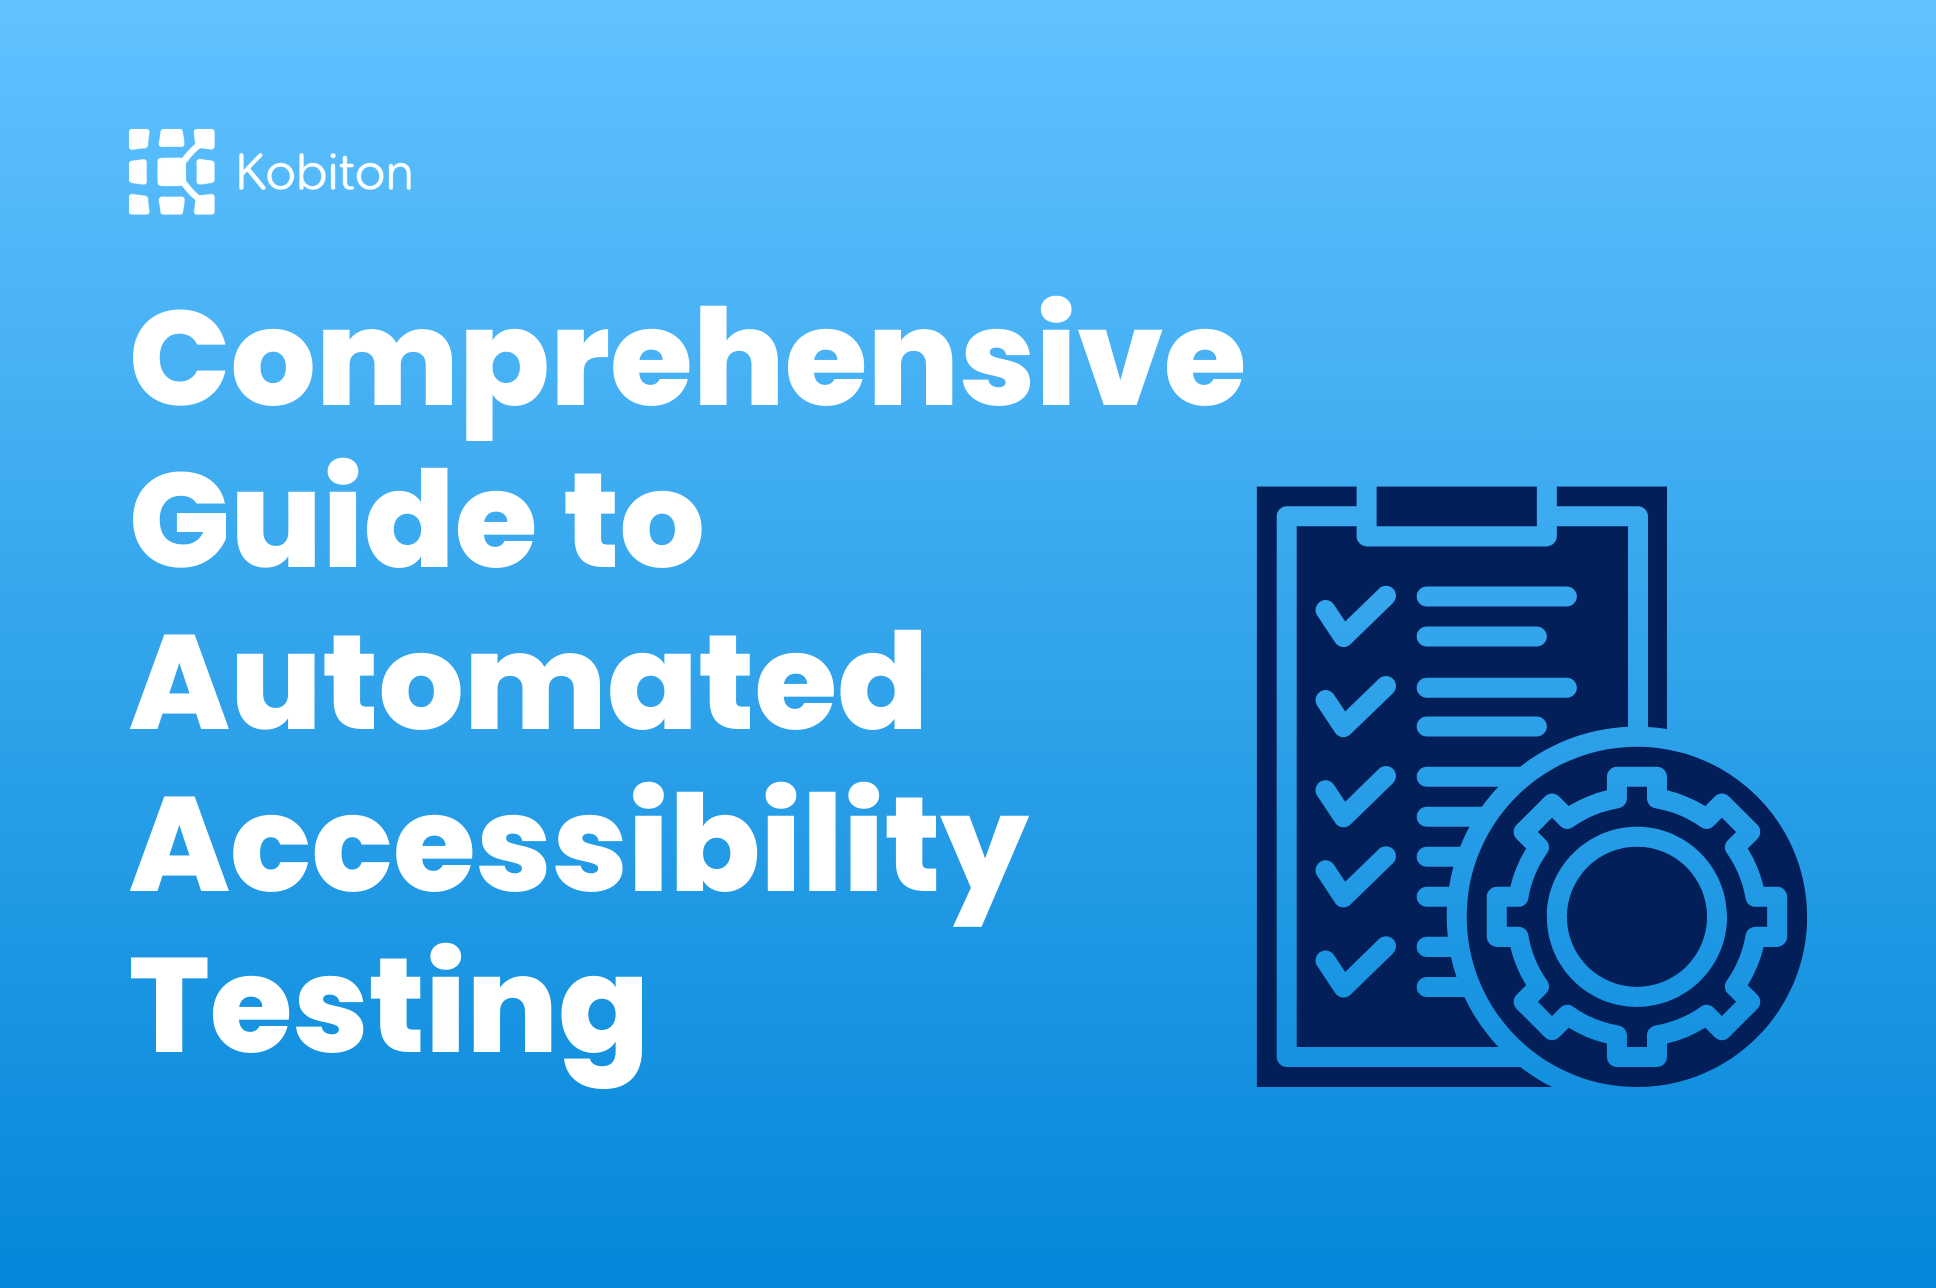 Automated Accessibility Testing